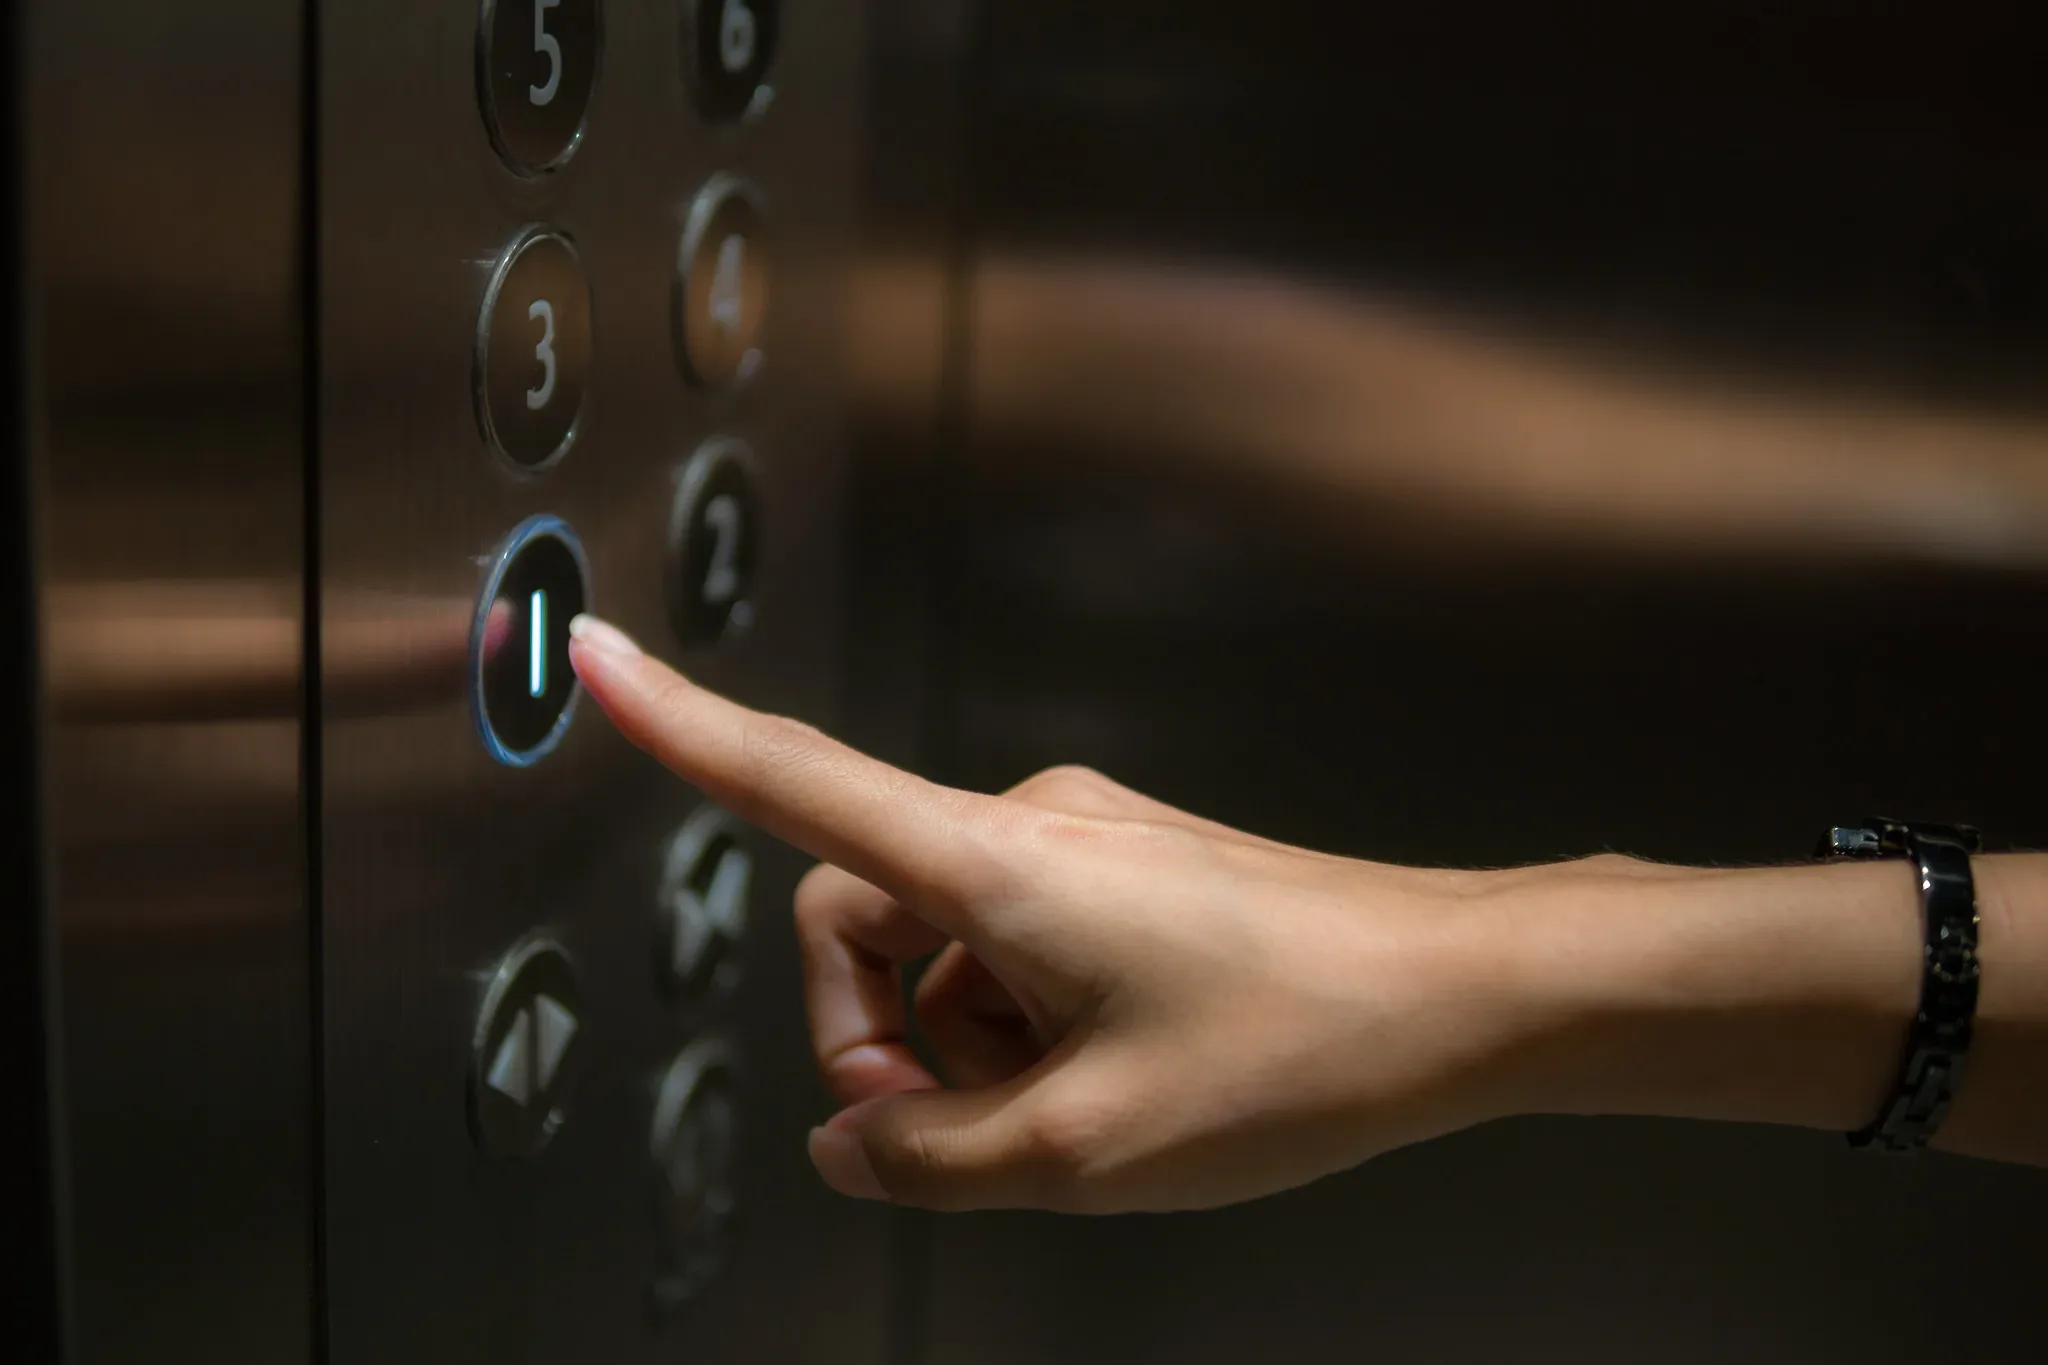 A person pressing the button on an elevator.